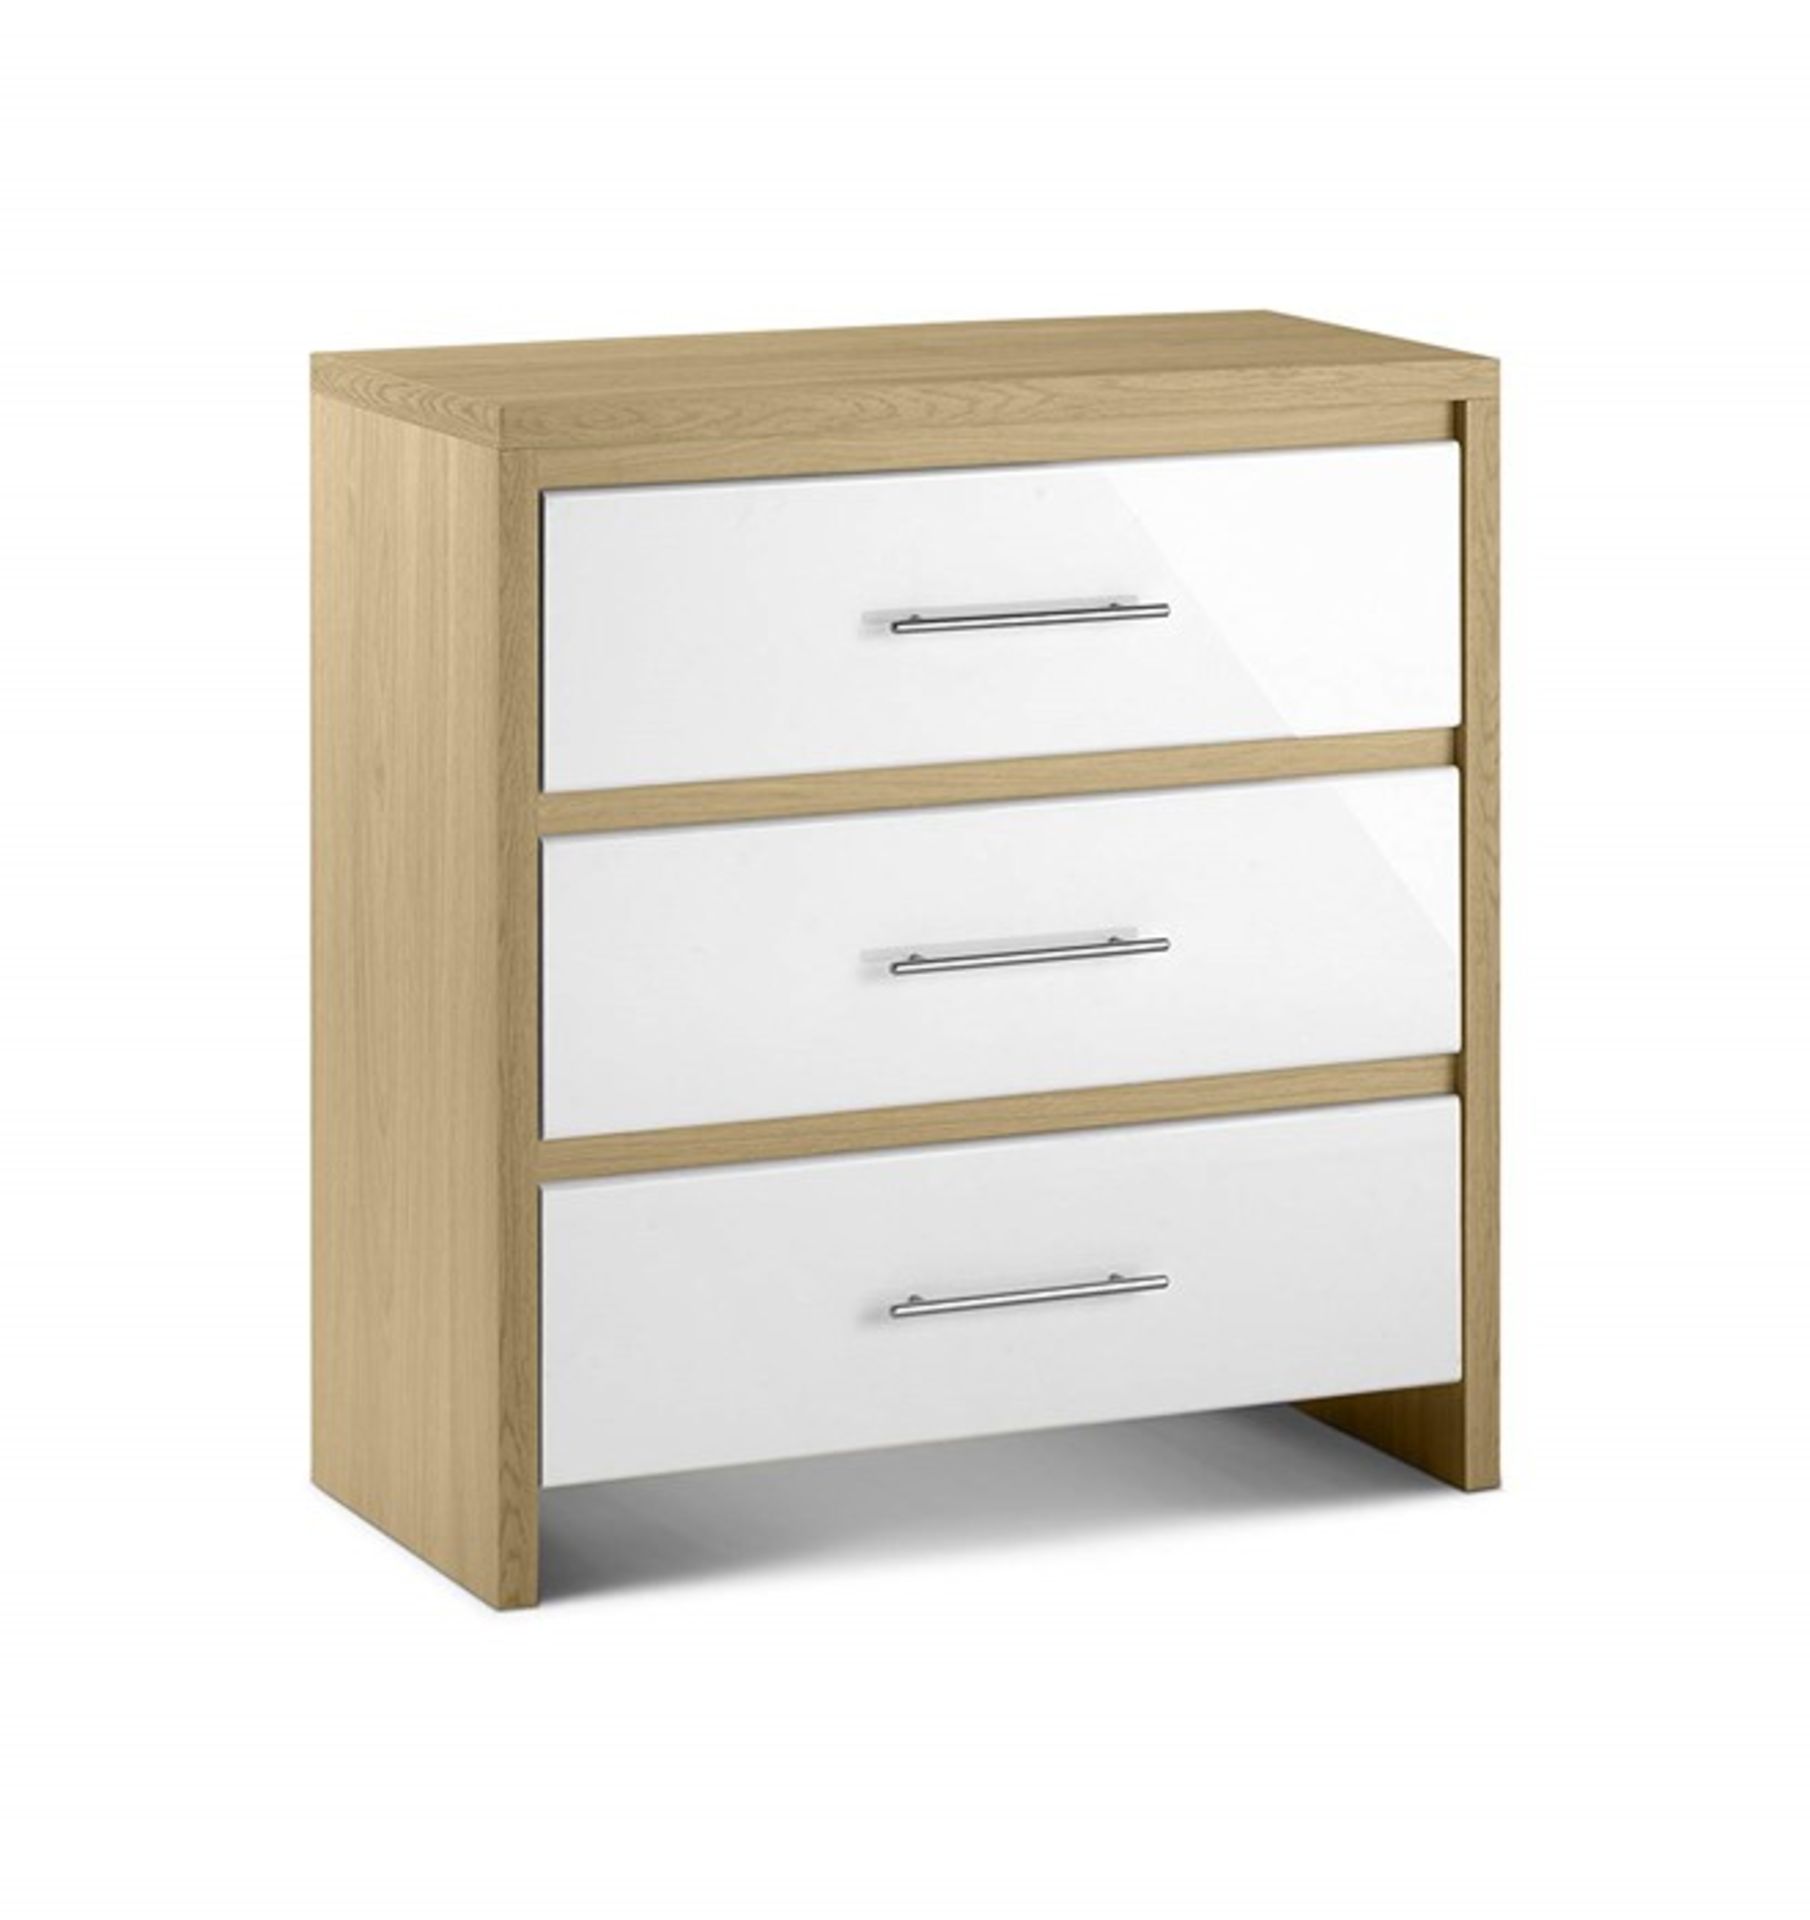 1 GRADE B BOXED STOCKHOLM 3 DRAWER CHEST IN WHITE/SONOMA OAK / RRP £134.00 (VIEWING HIGHLY